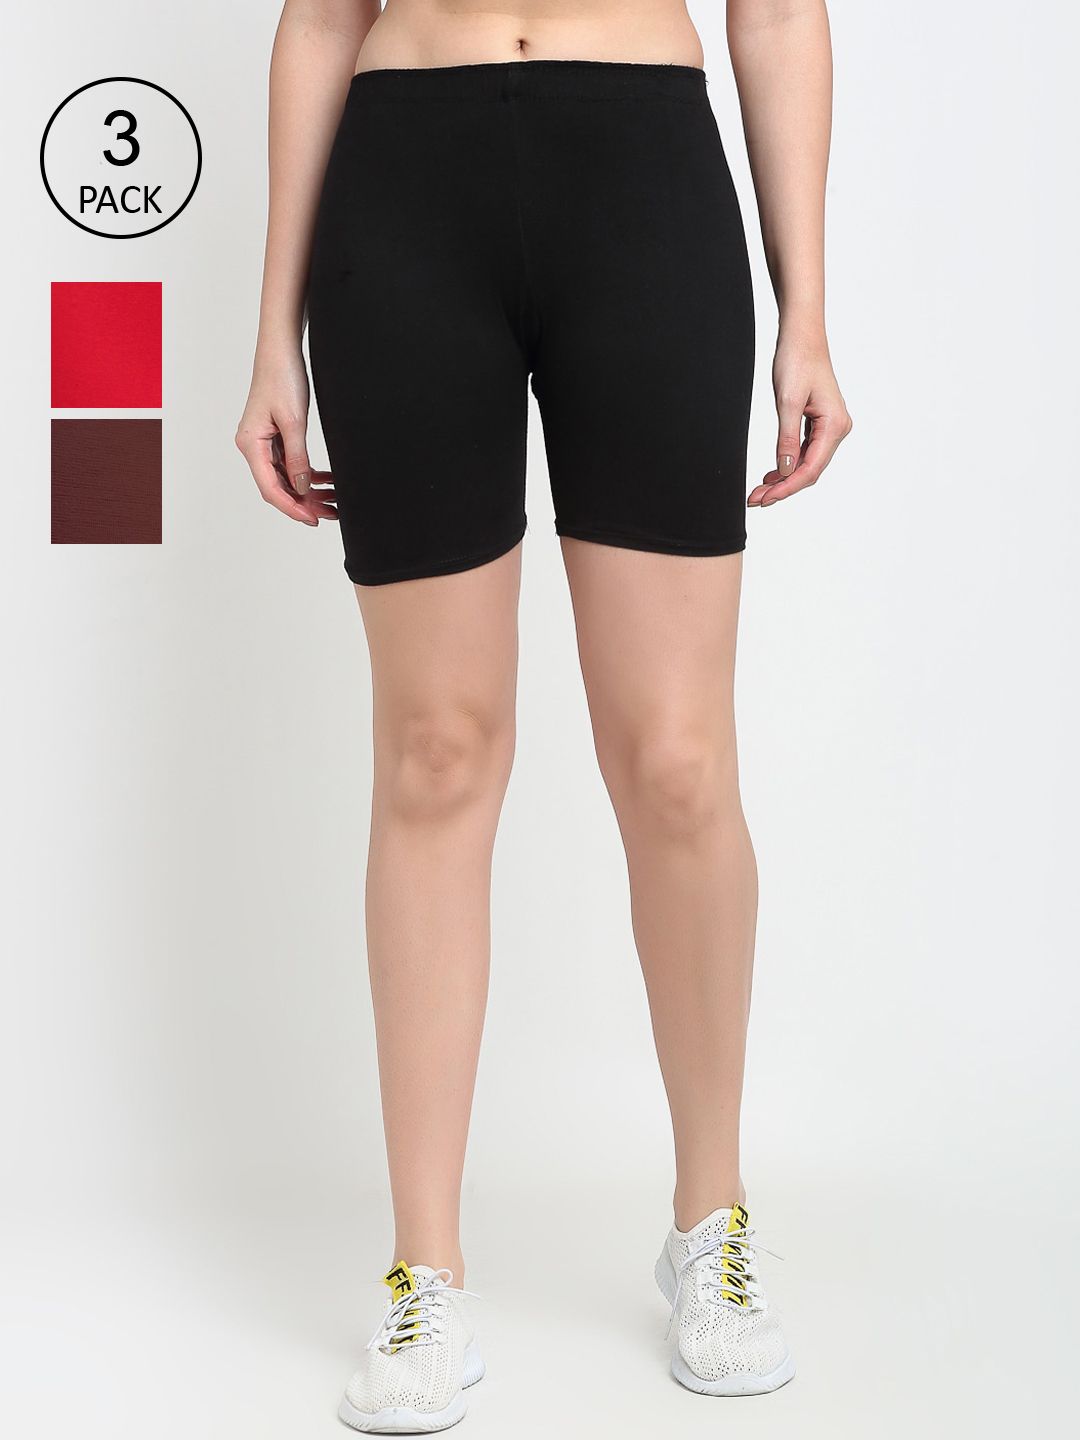 GRACIT Women Pack of 3 Solid Biker Shorts Price in India